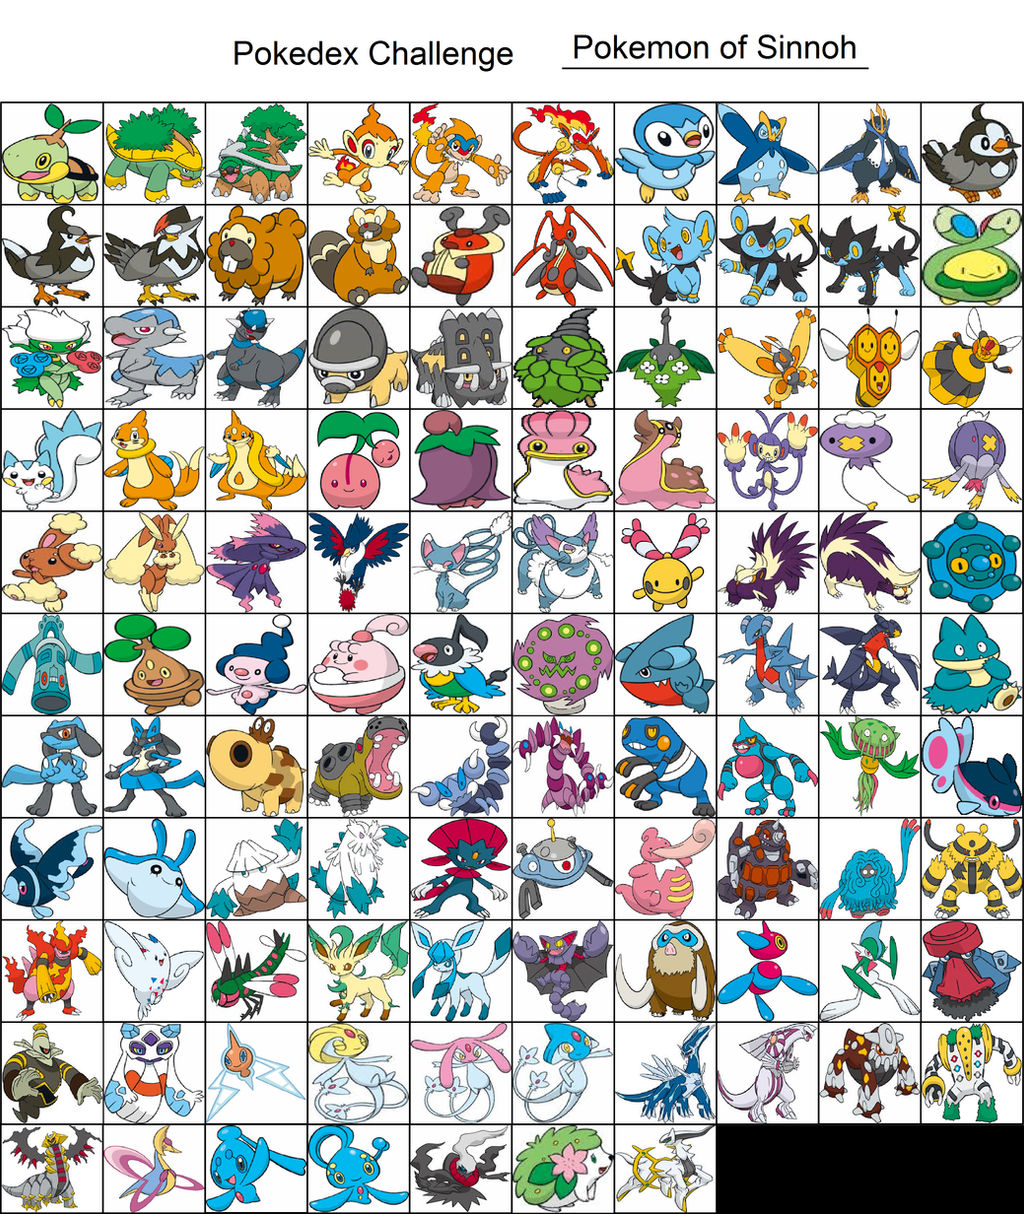 Pokémon by Review: #489 - #490: Phione & Manaphy